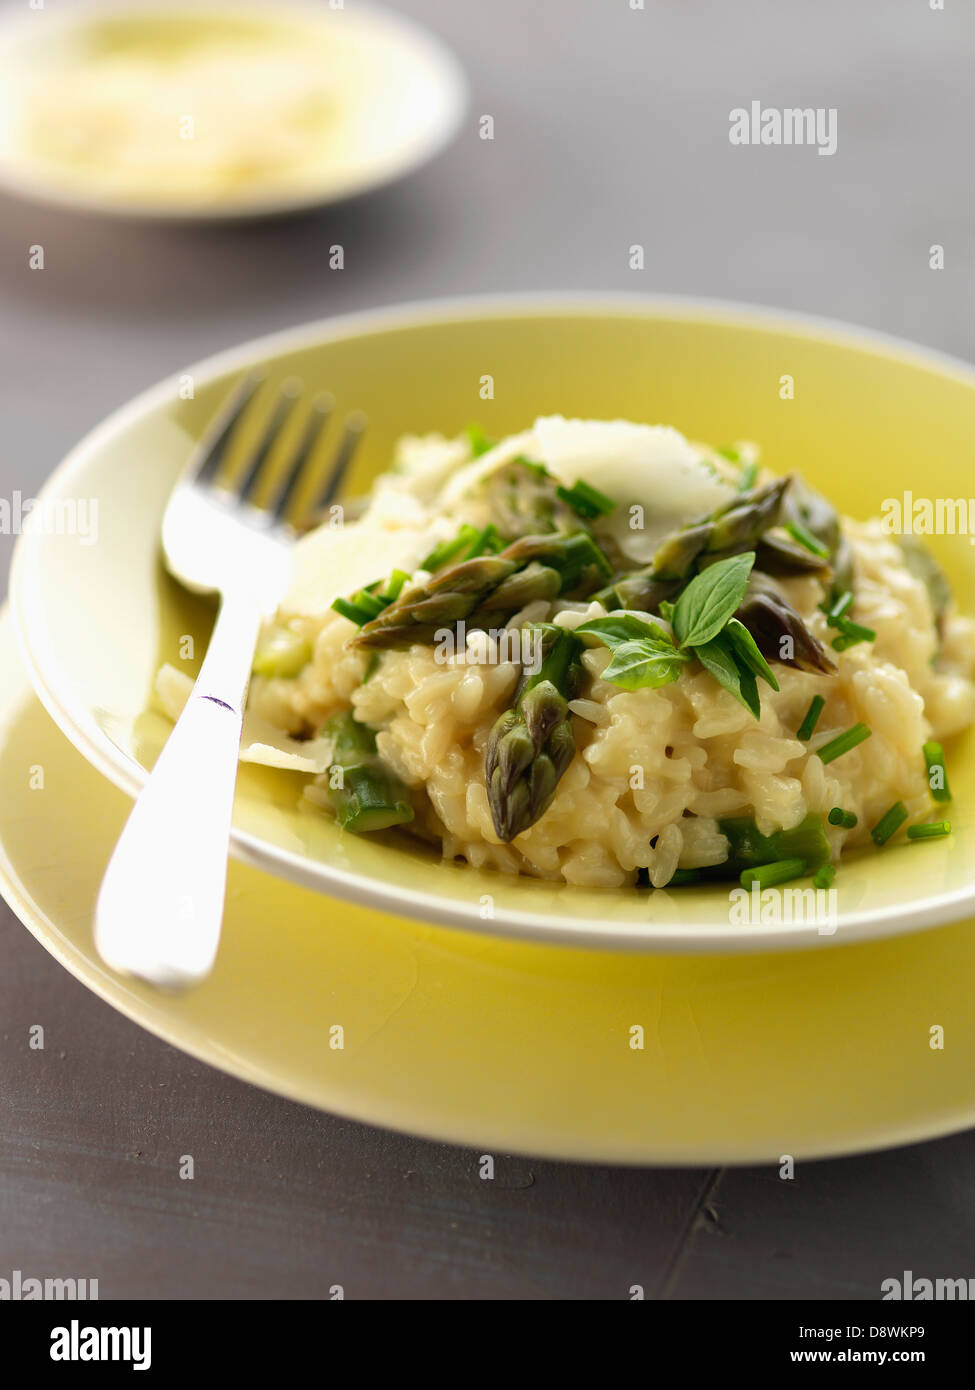 Spargel-risotto Stockfoto